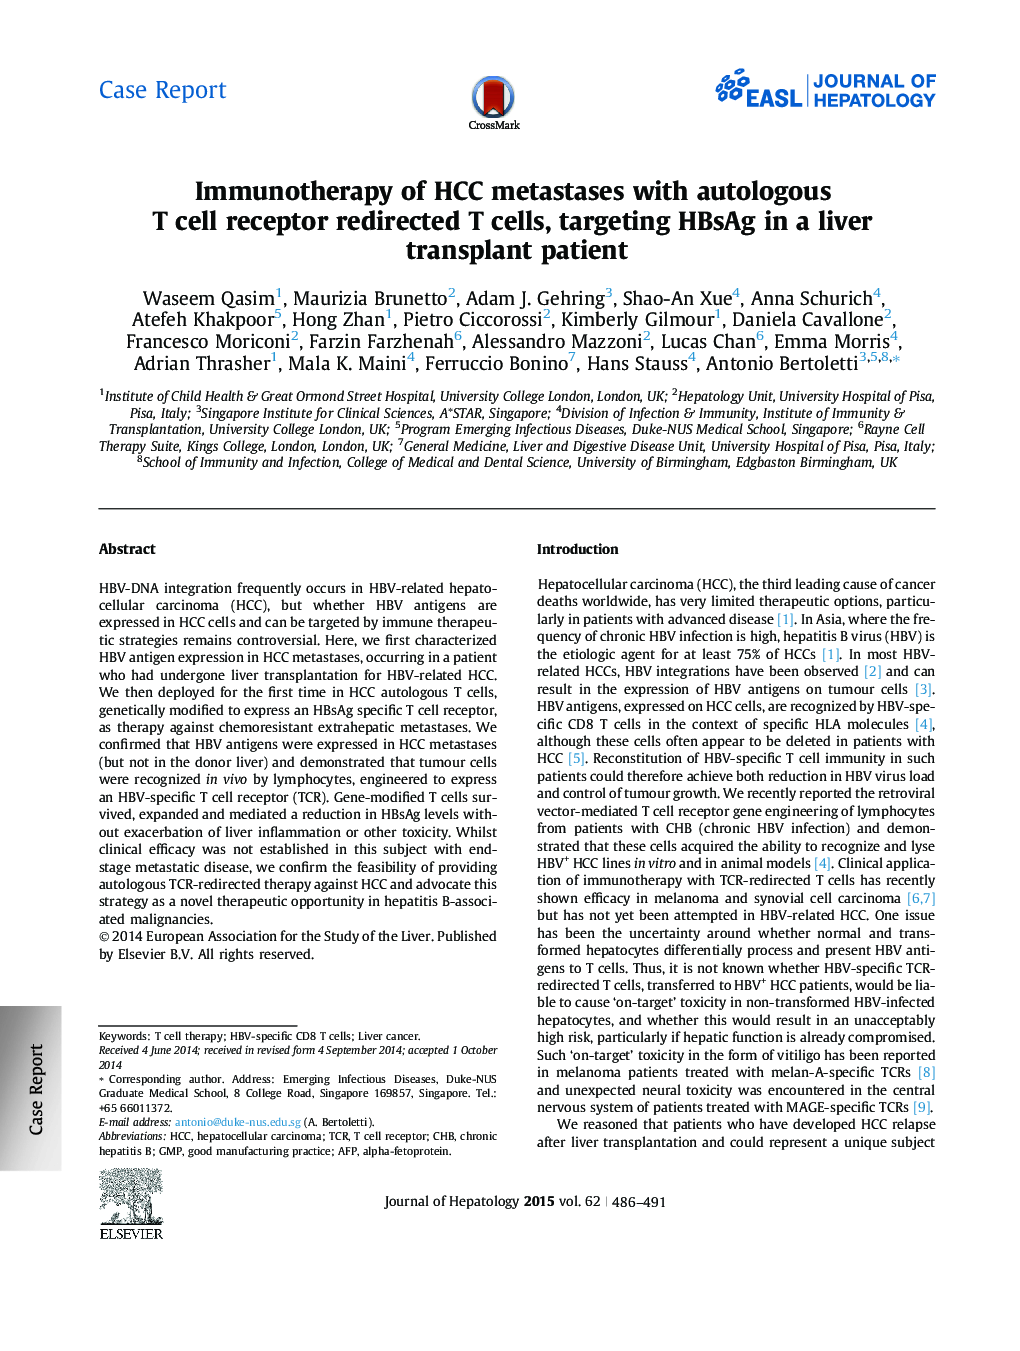 Case ReportImmunotherapy of HCC metastases with autologous T cell receptor redirected T cells, targeting HBsAg in a liver transplant patient